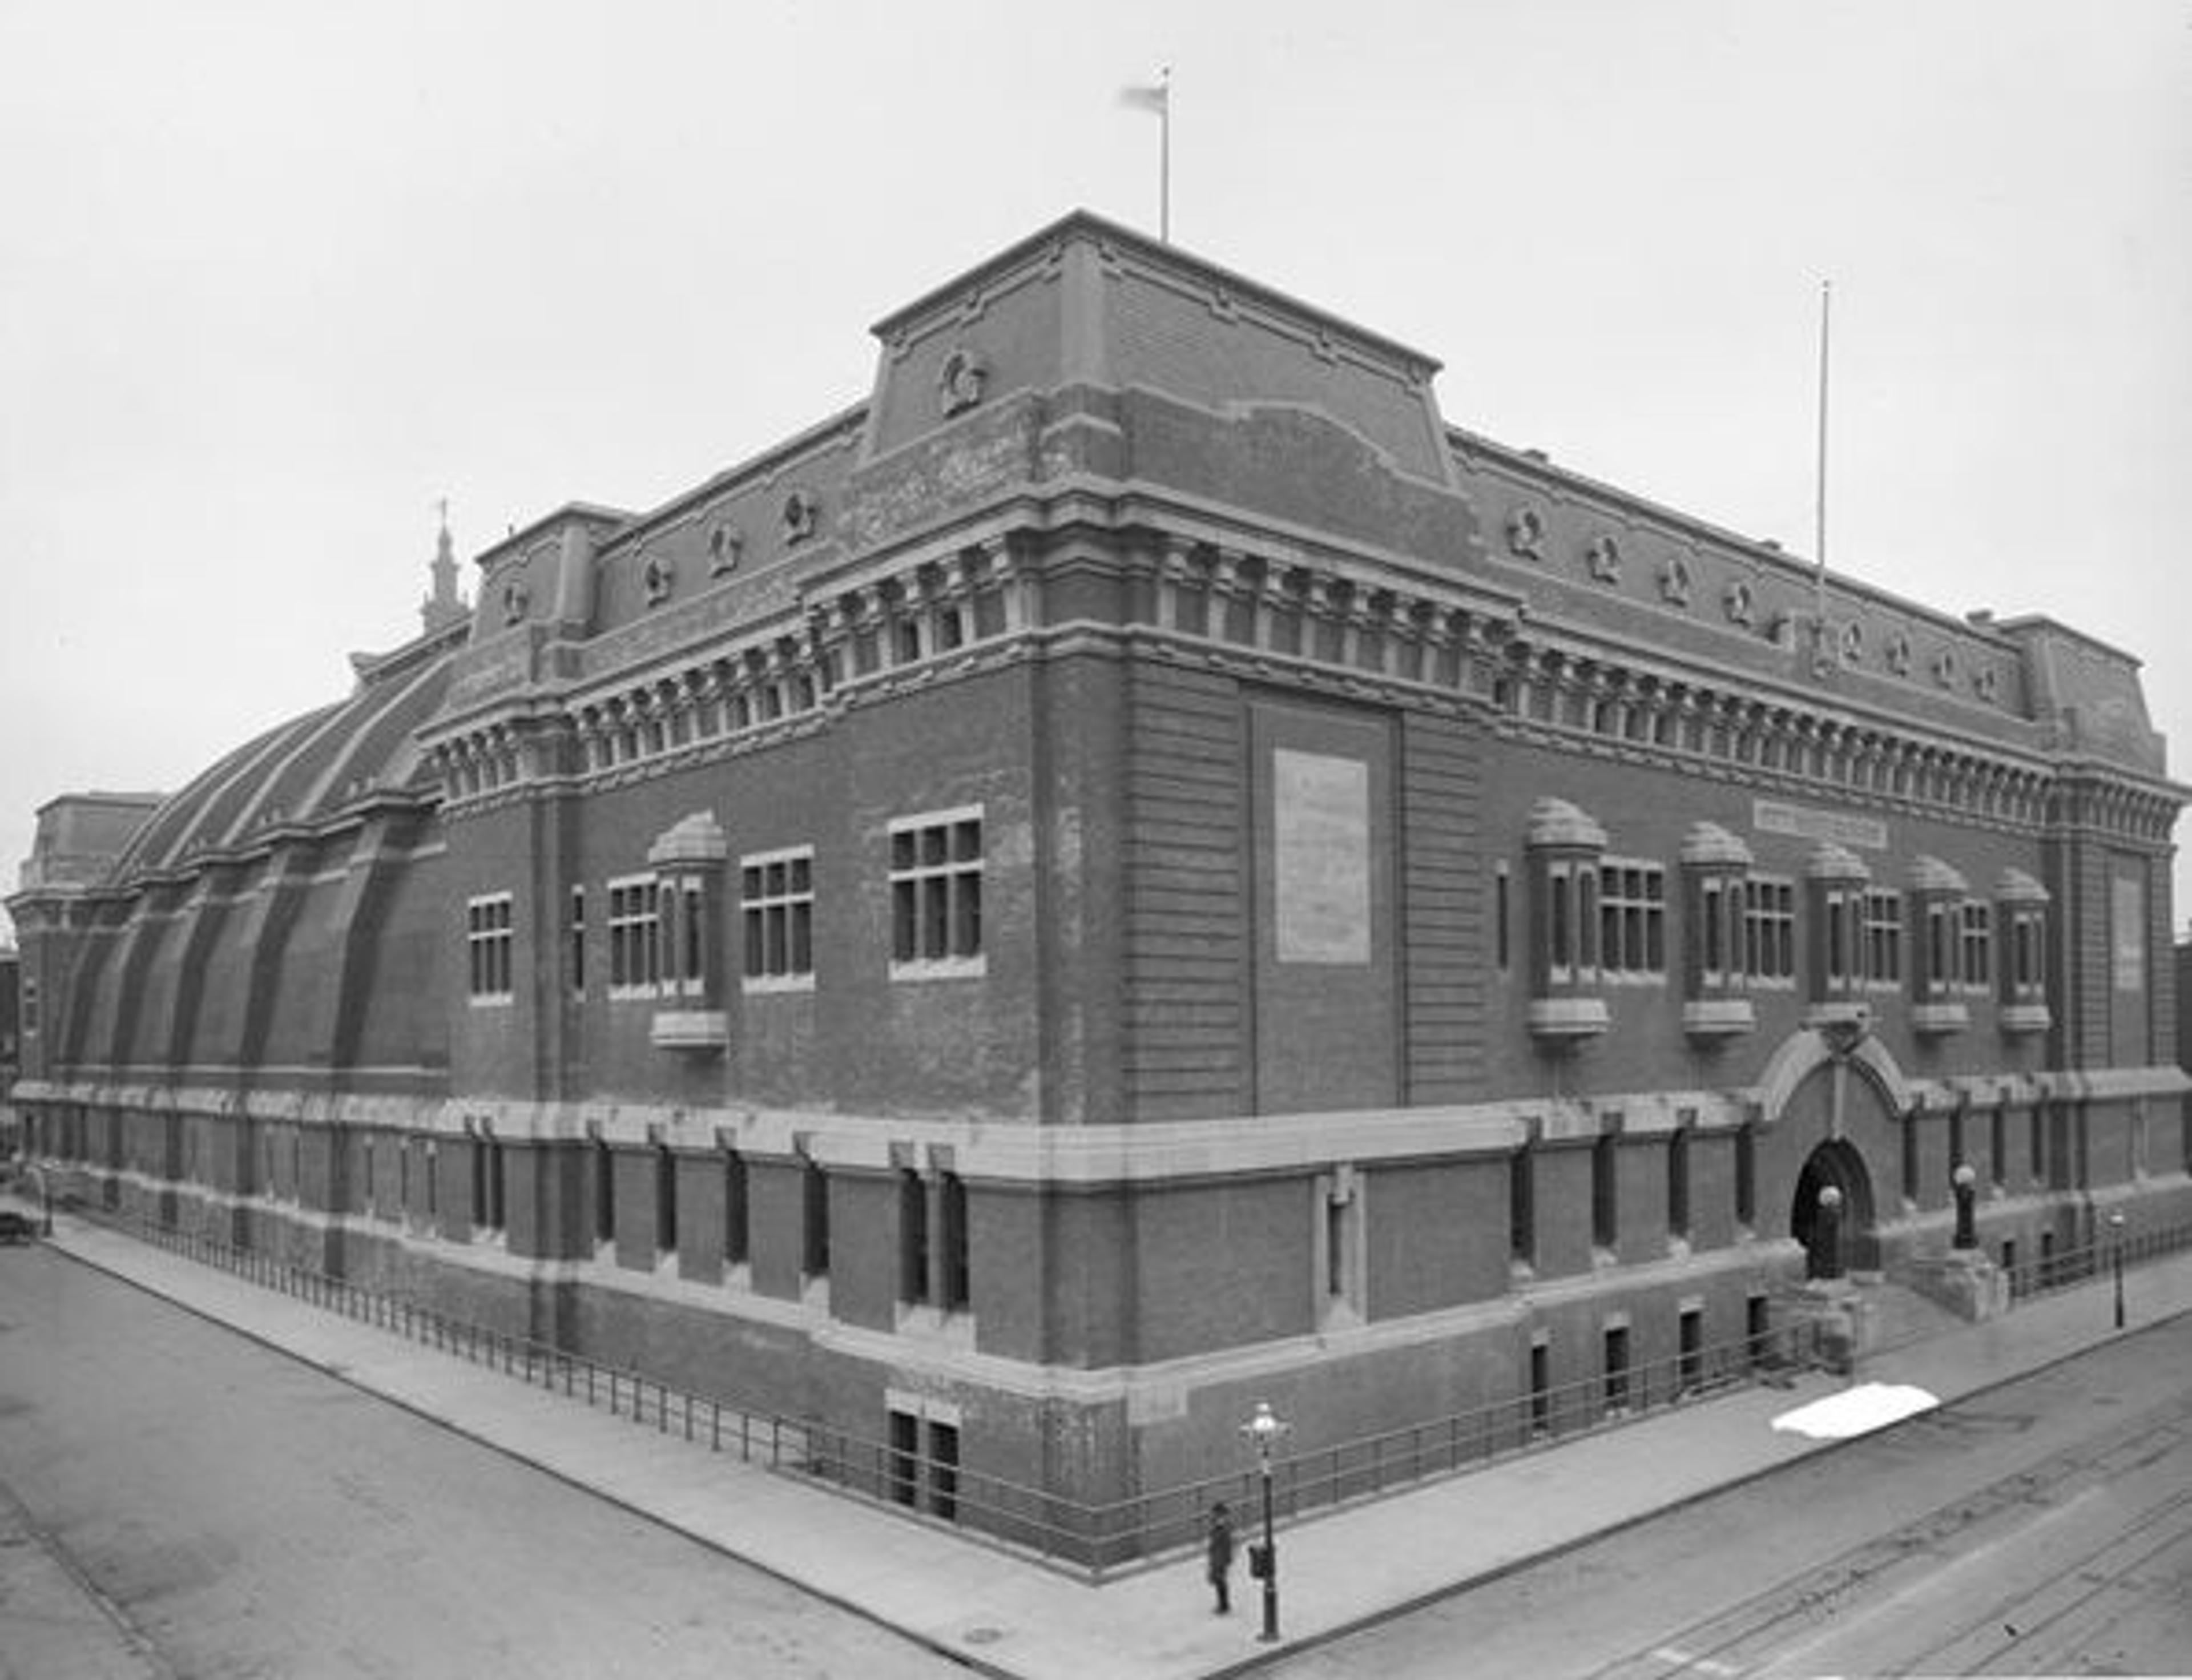 69th Regiment Armory building